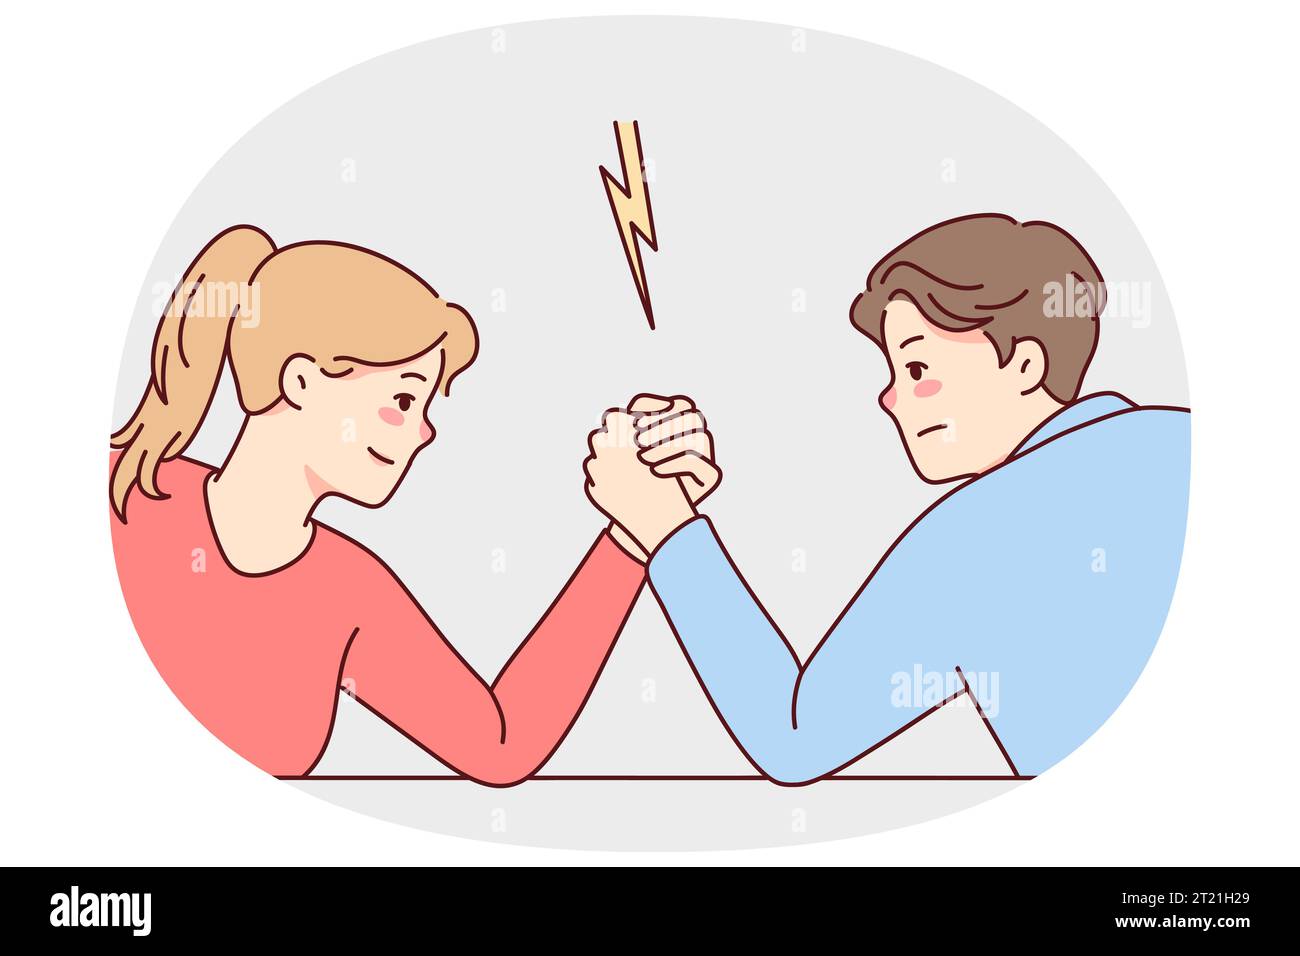 Man and woman arm wrestling decide leadership and dominance. Male and female cartoon characters demonstrate strength and power. Vector illustration. Stock Vector